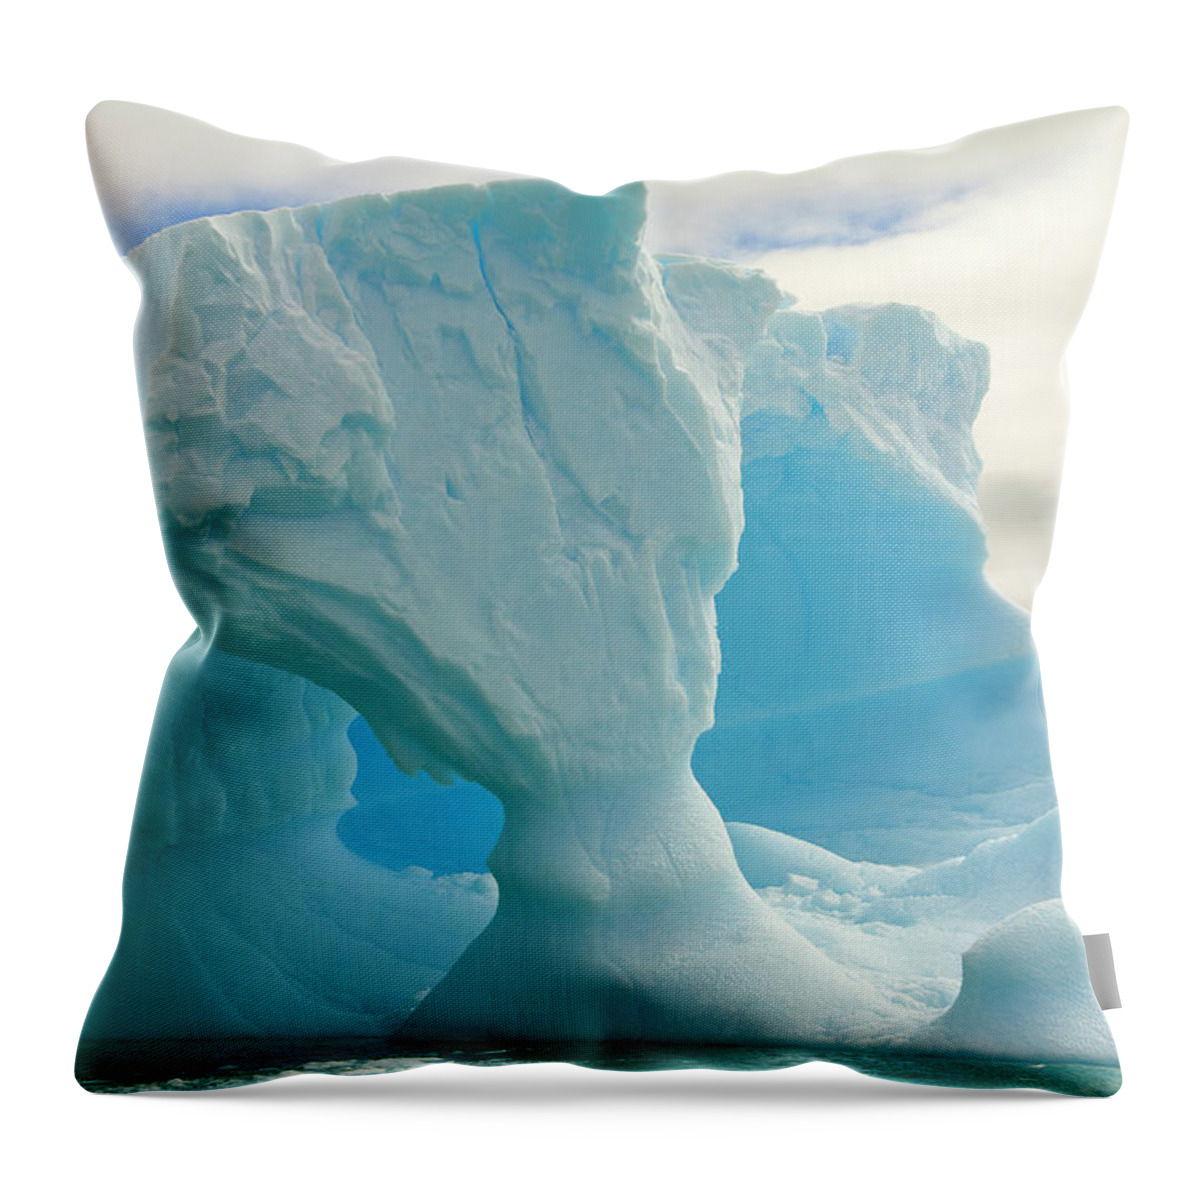 Scenics Throw Pillow featuring the photograph Iceberg With Arches, Antarctic Peninsula #1 by Eastcott Momatiuk